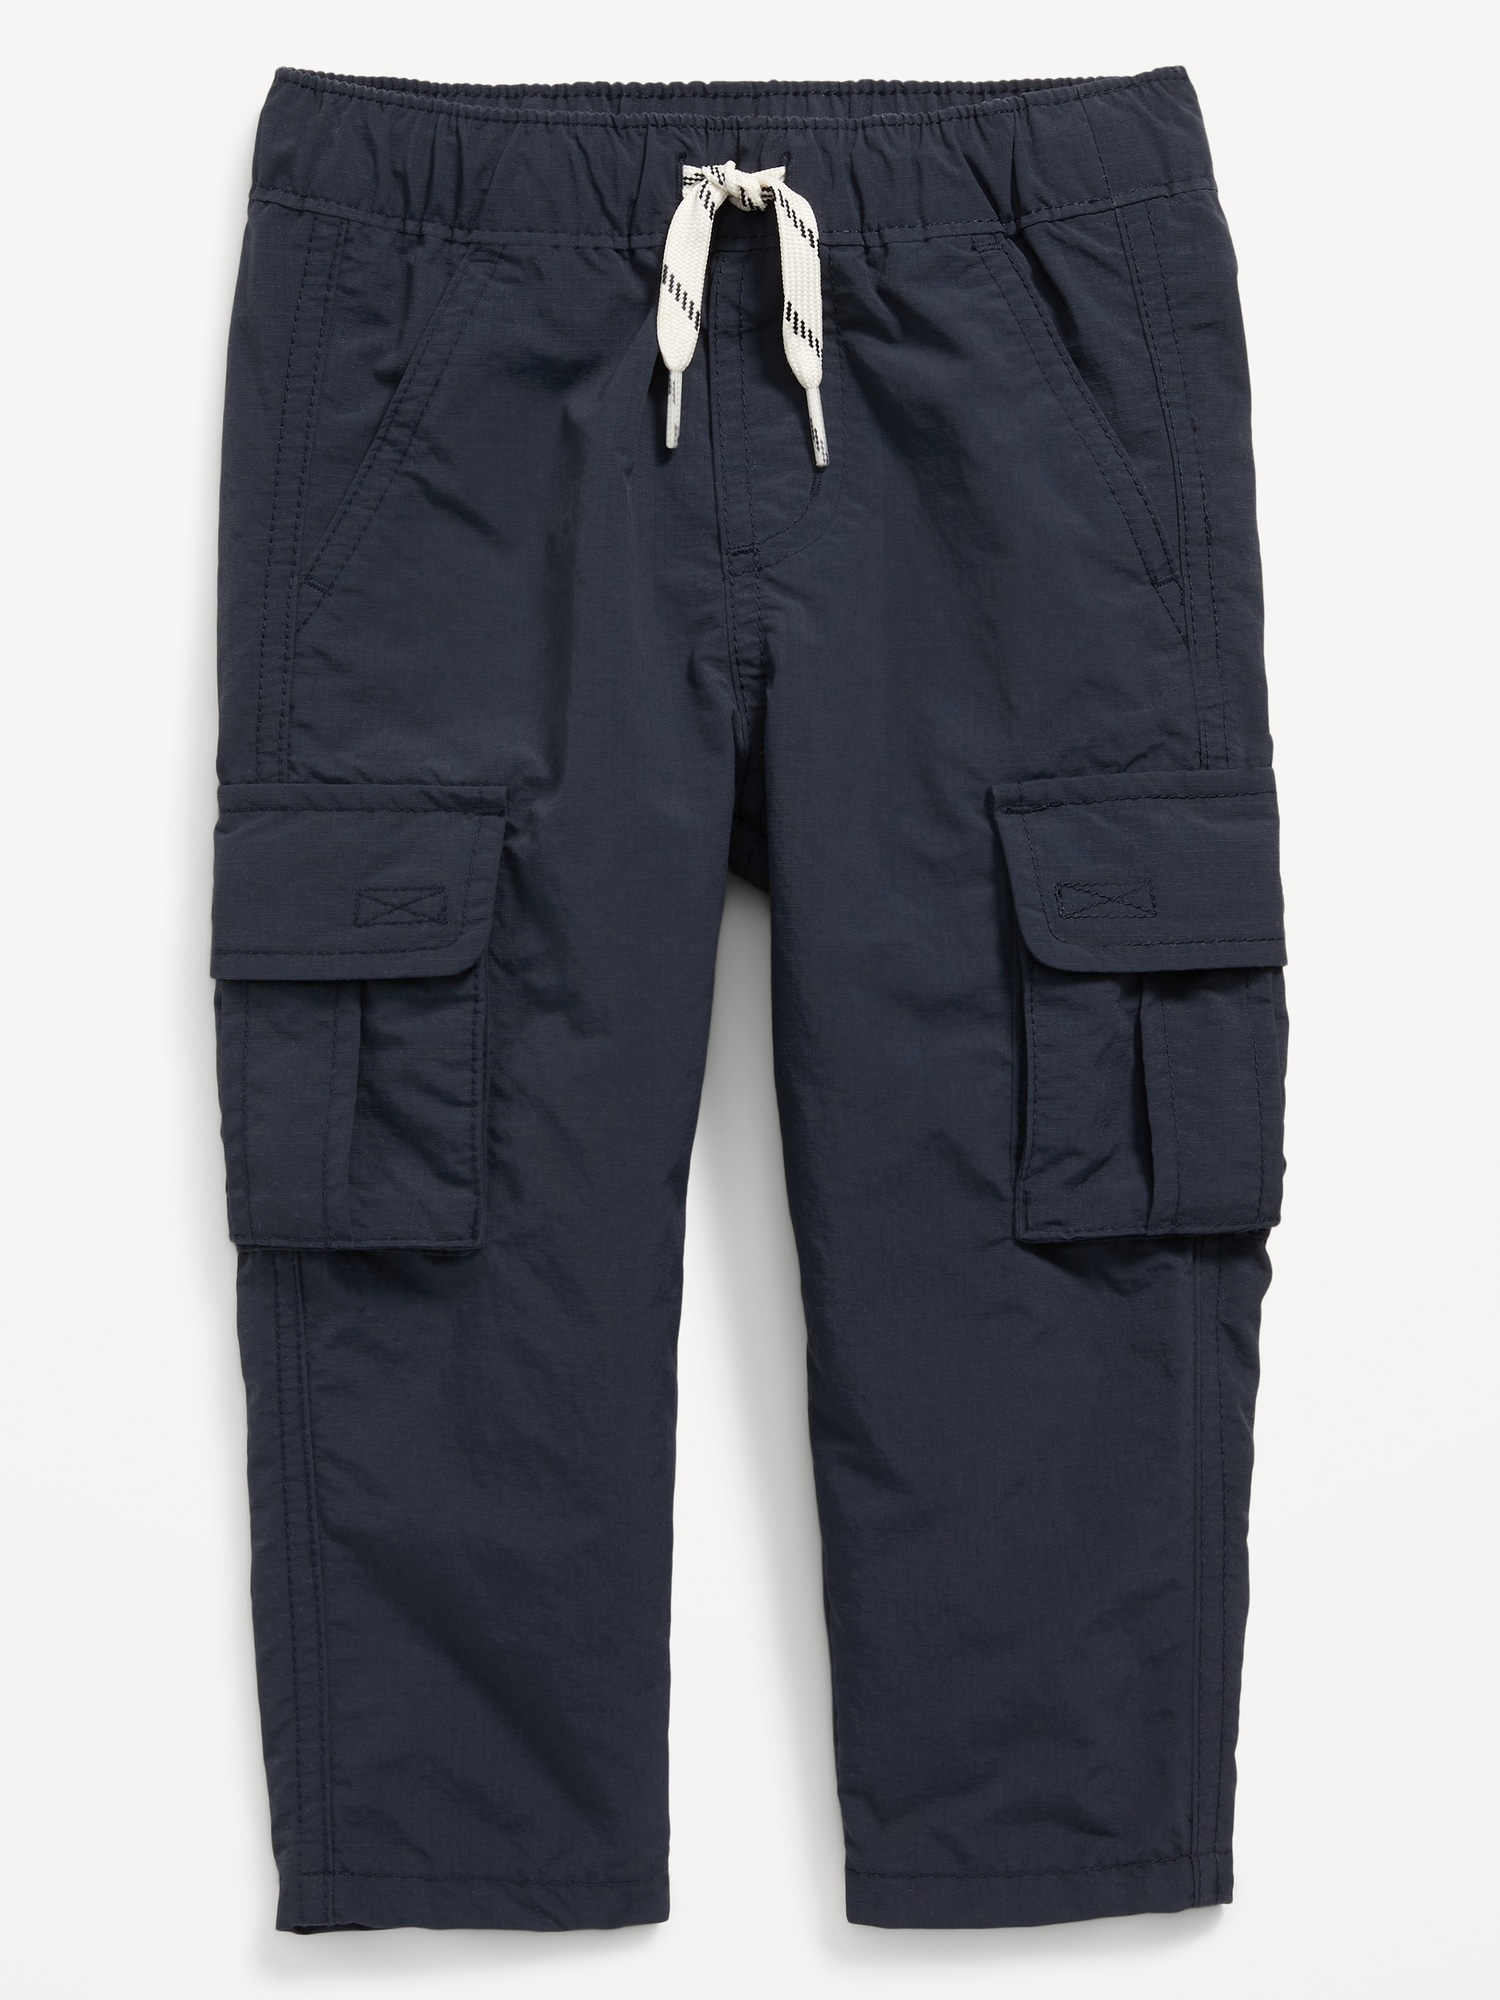 Adjustable cargo pants that fit soo good #find #finds #ama